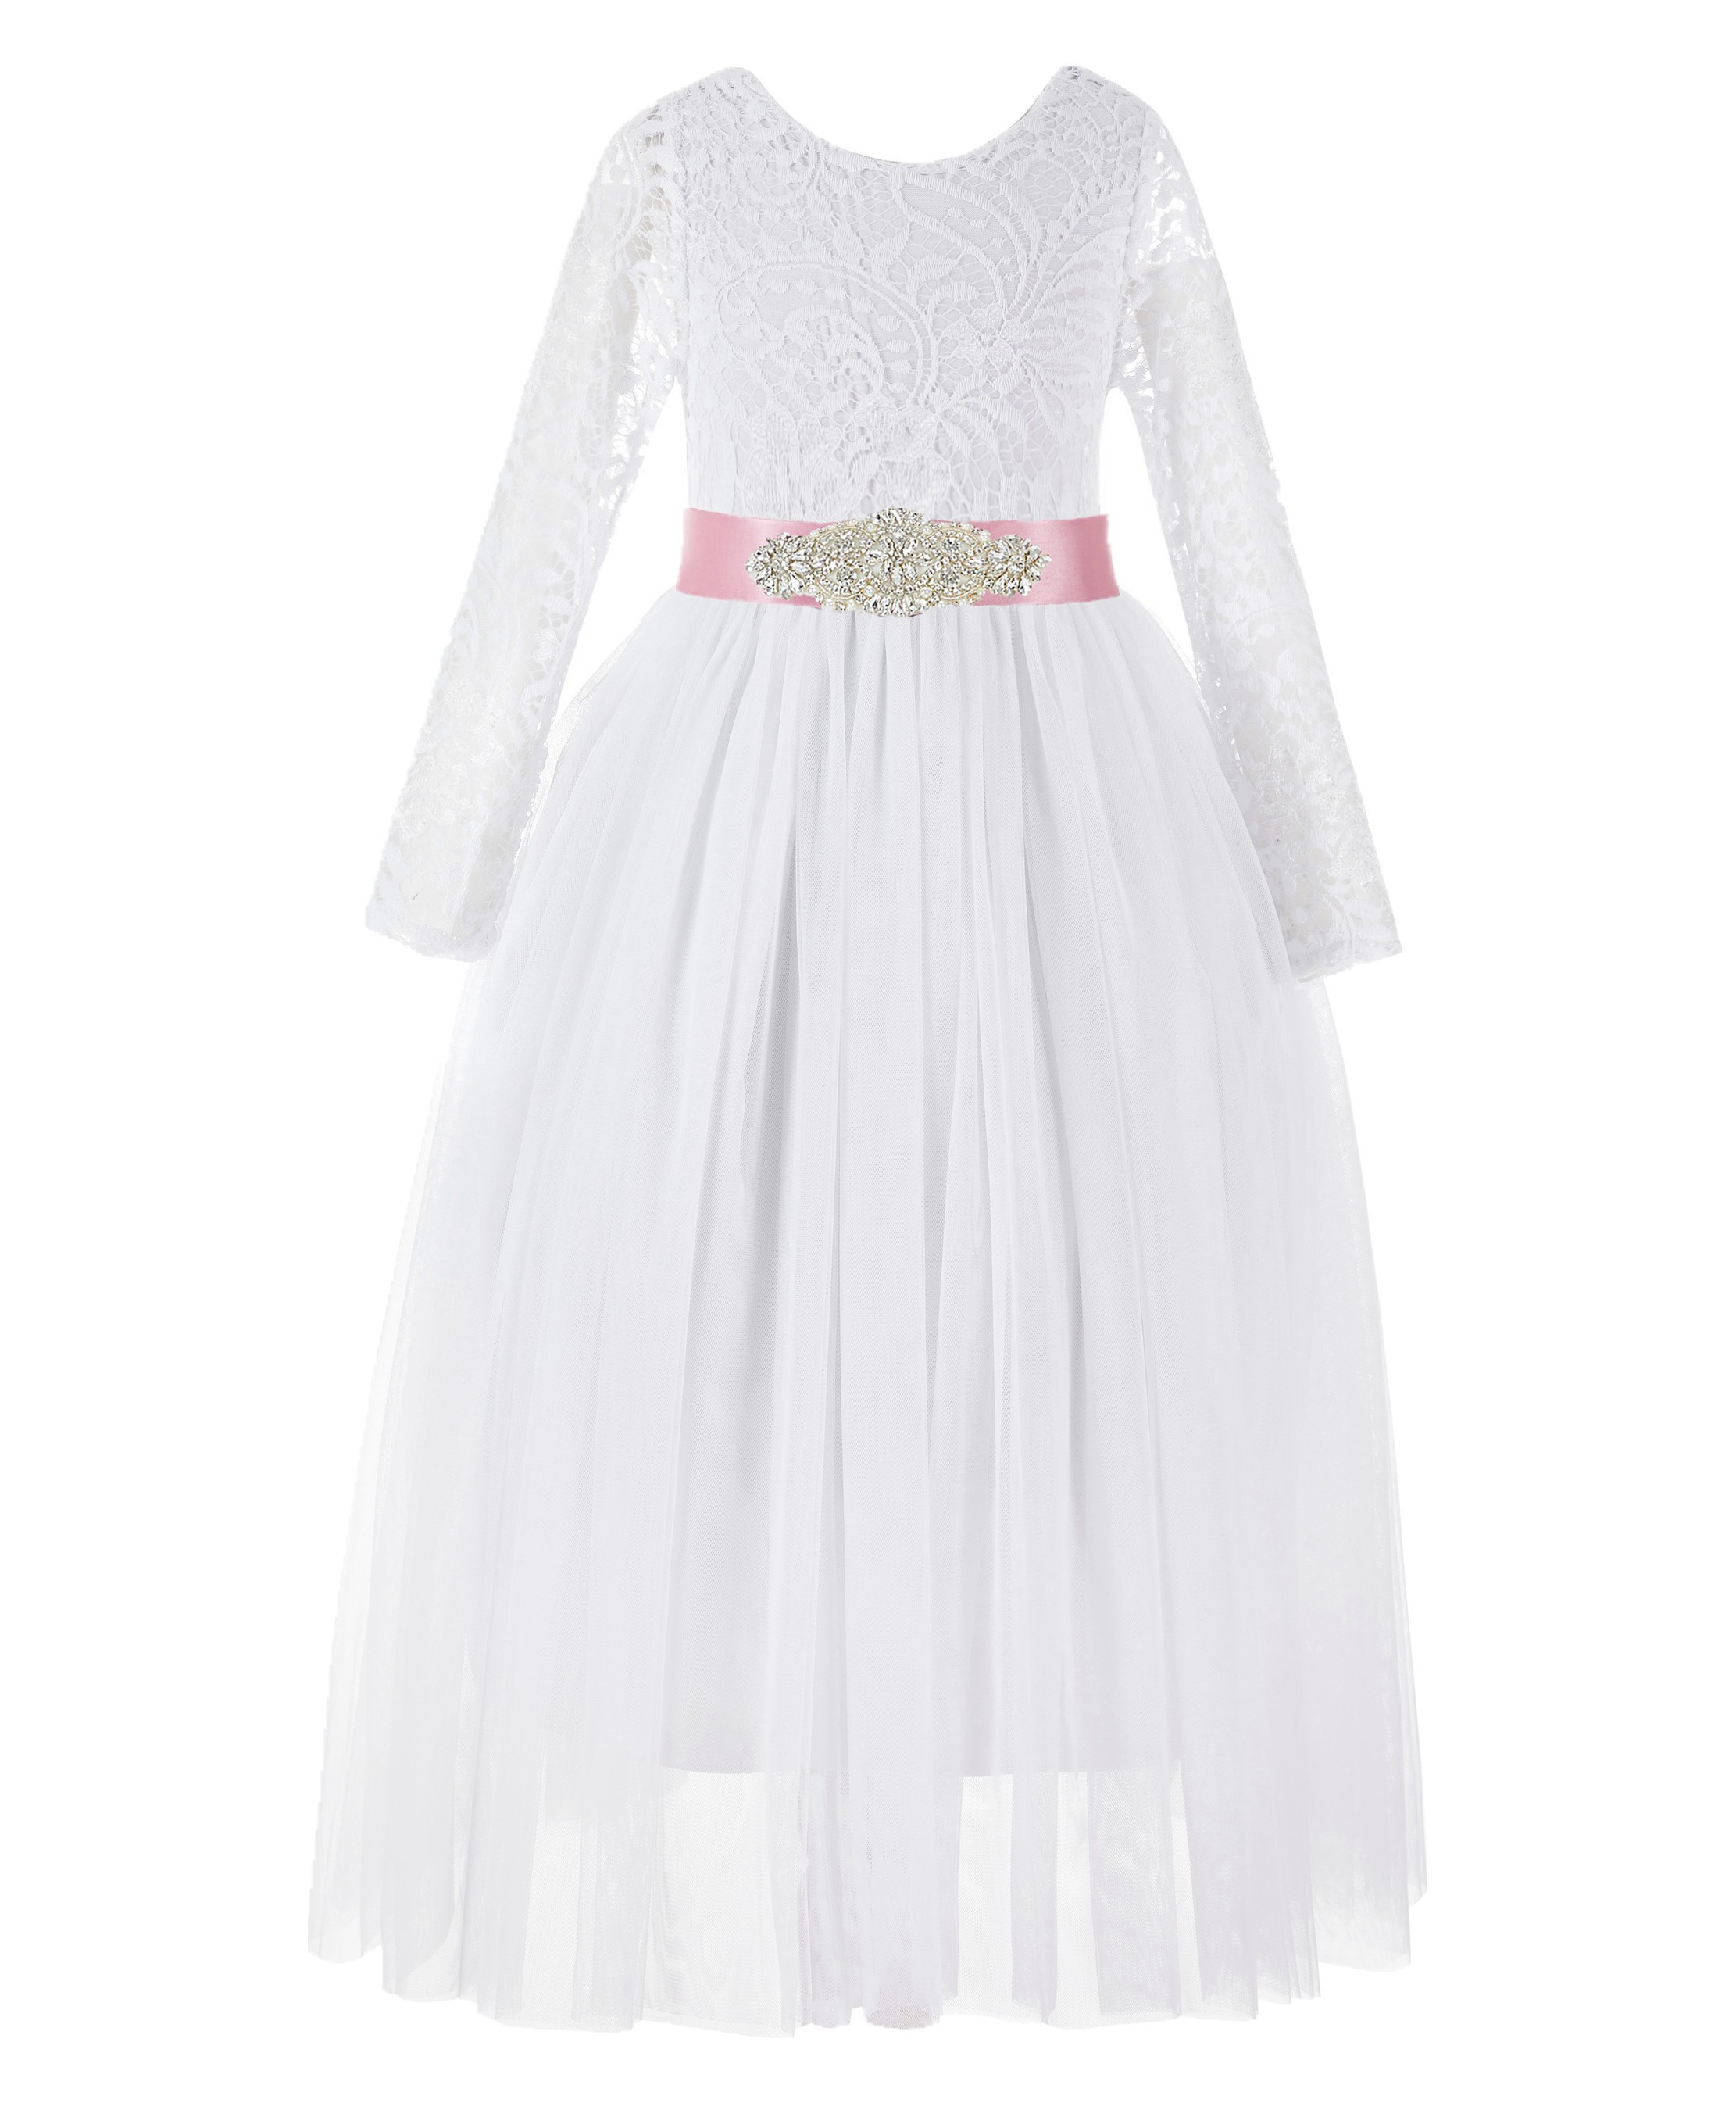 White / Mauve A-Line V-Back Lace Flower Girl Dress with Sleeves 290R